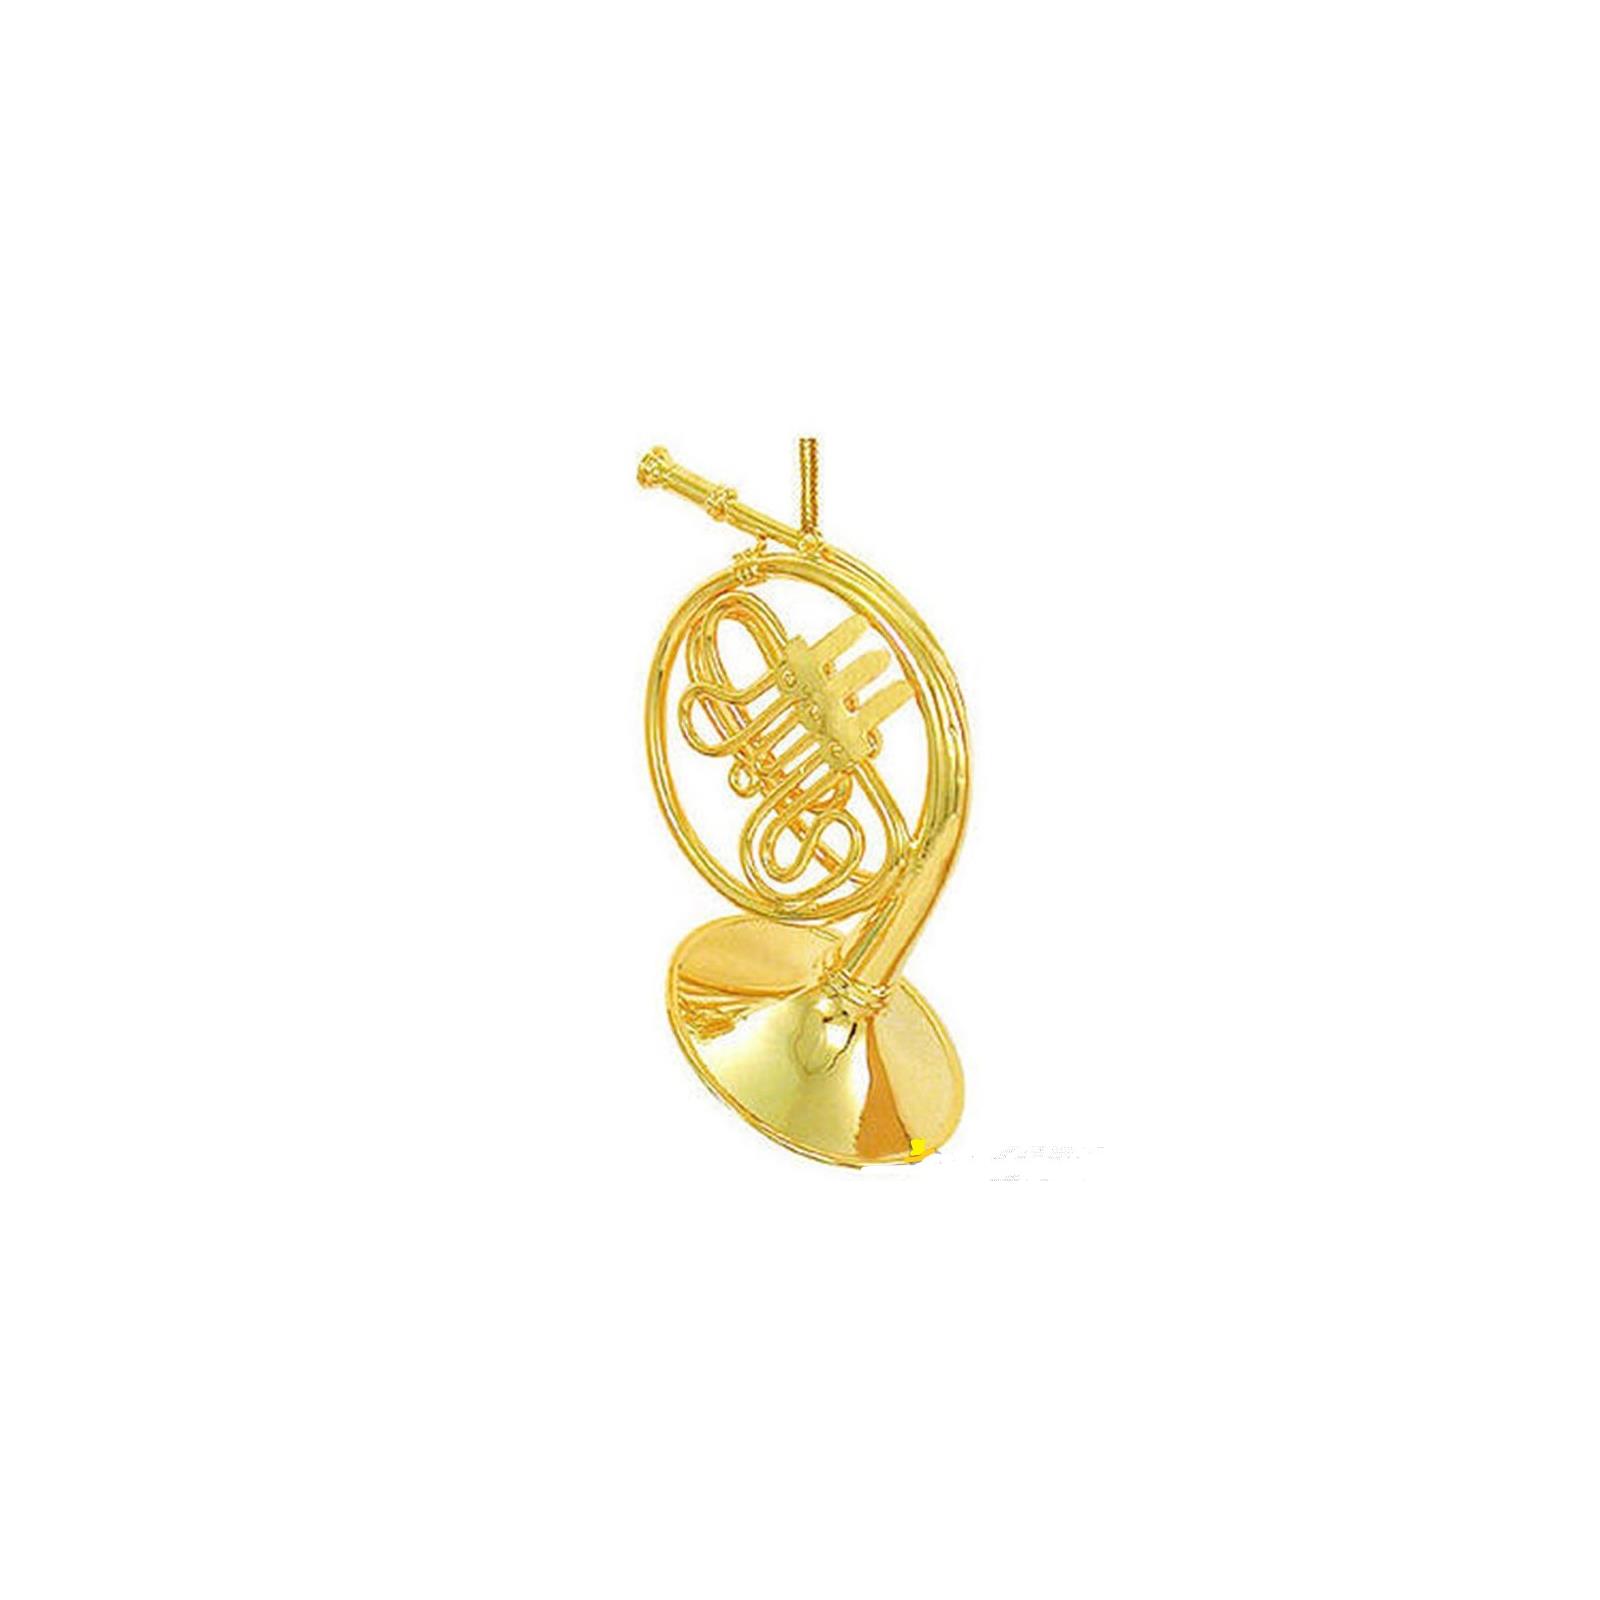 Music Treasures French Horn Ornament